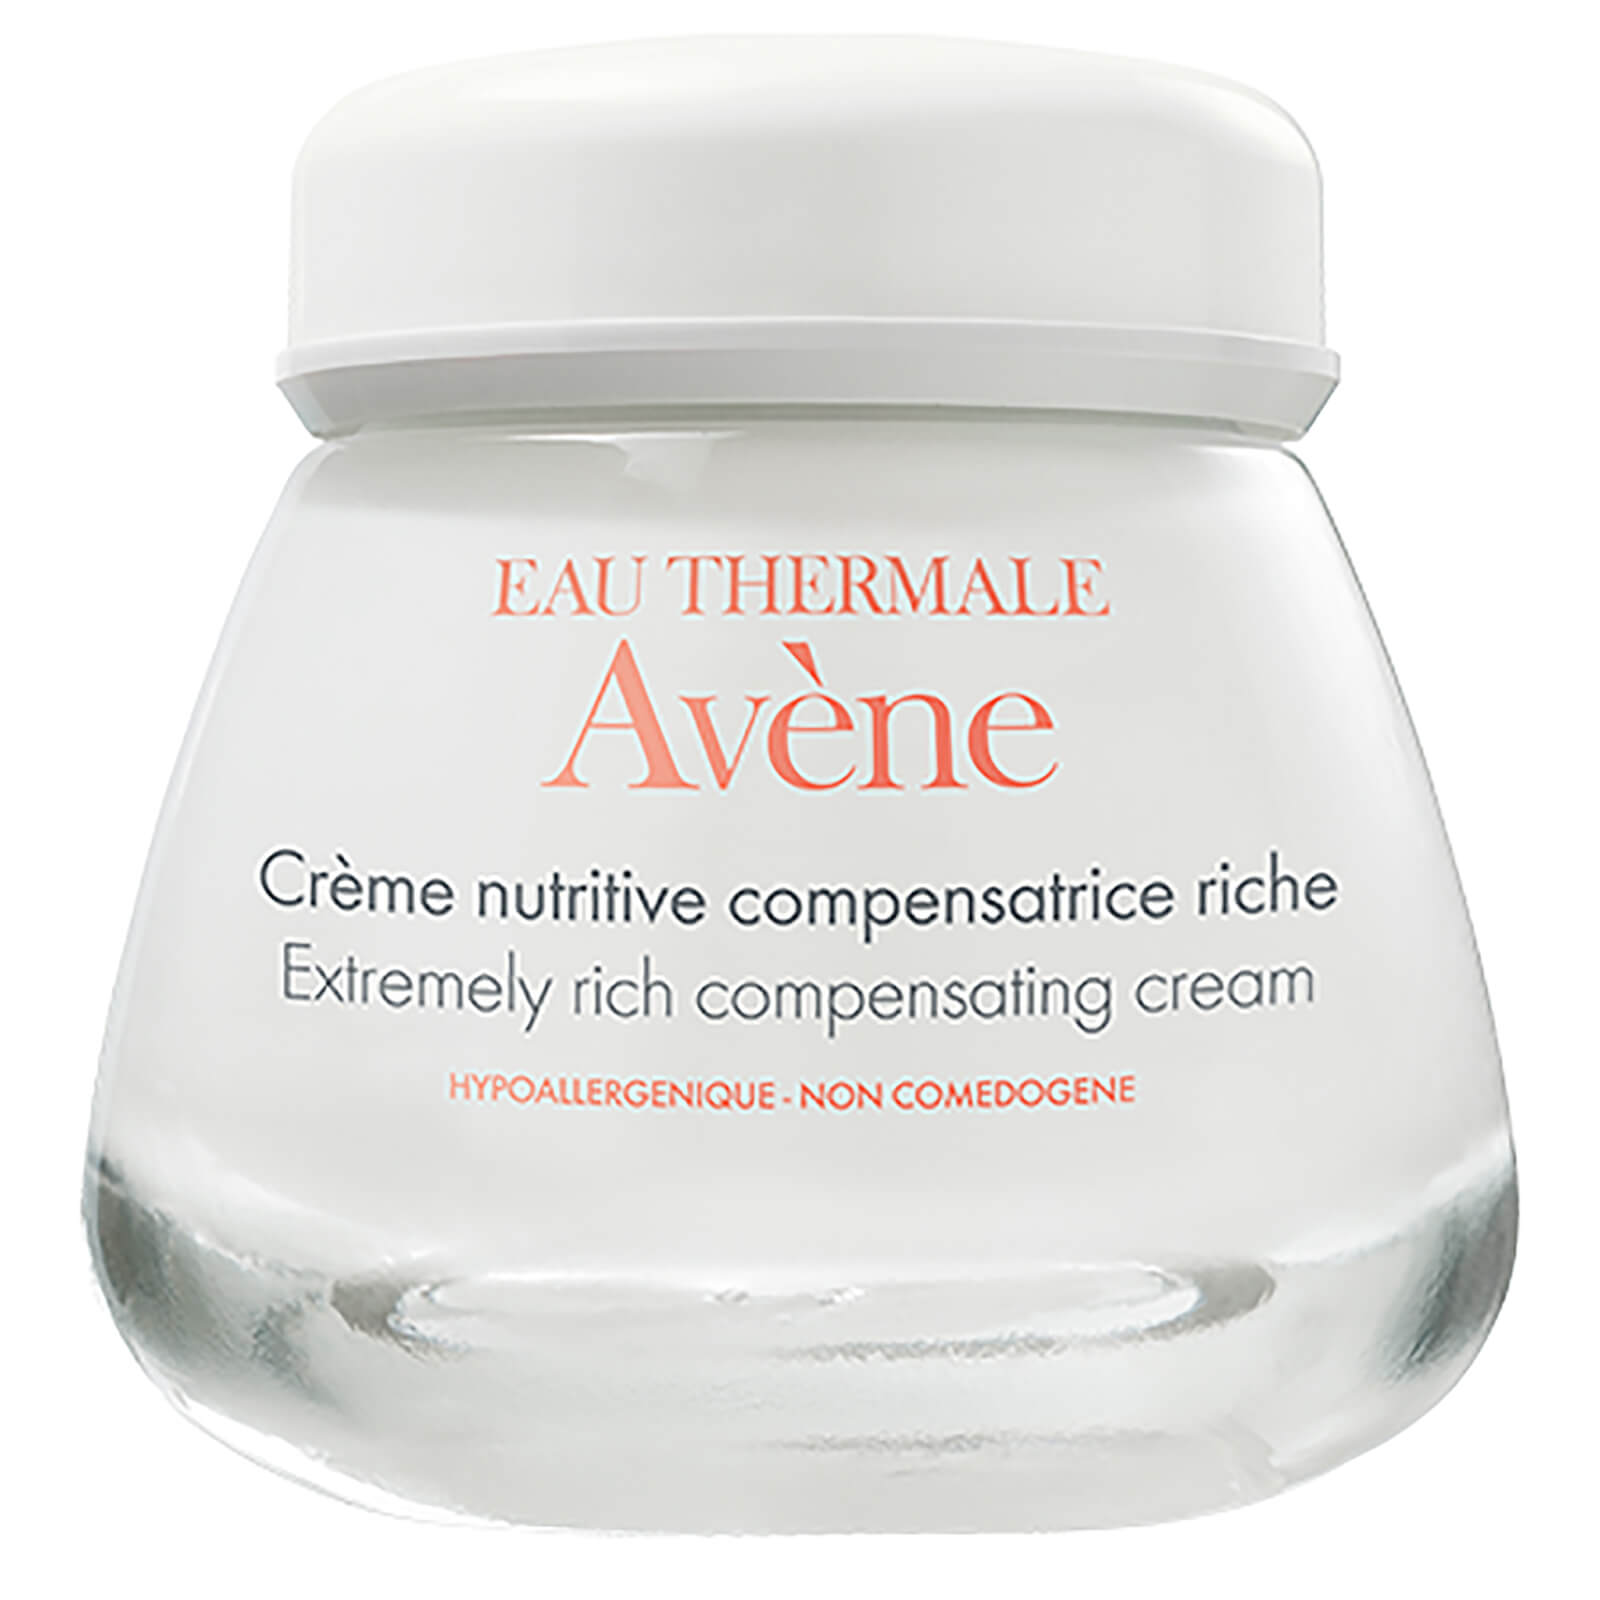 Avène Extremely Rich Compensating Cream 50ml